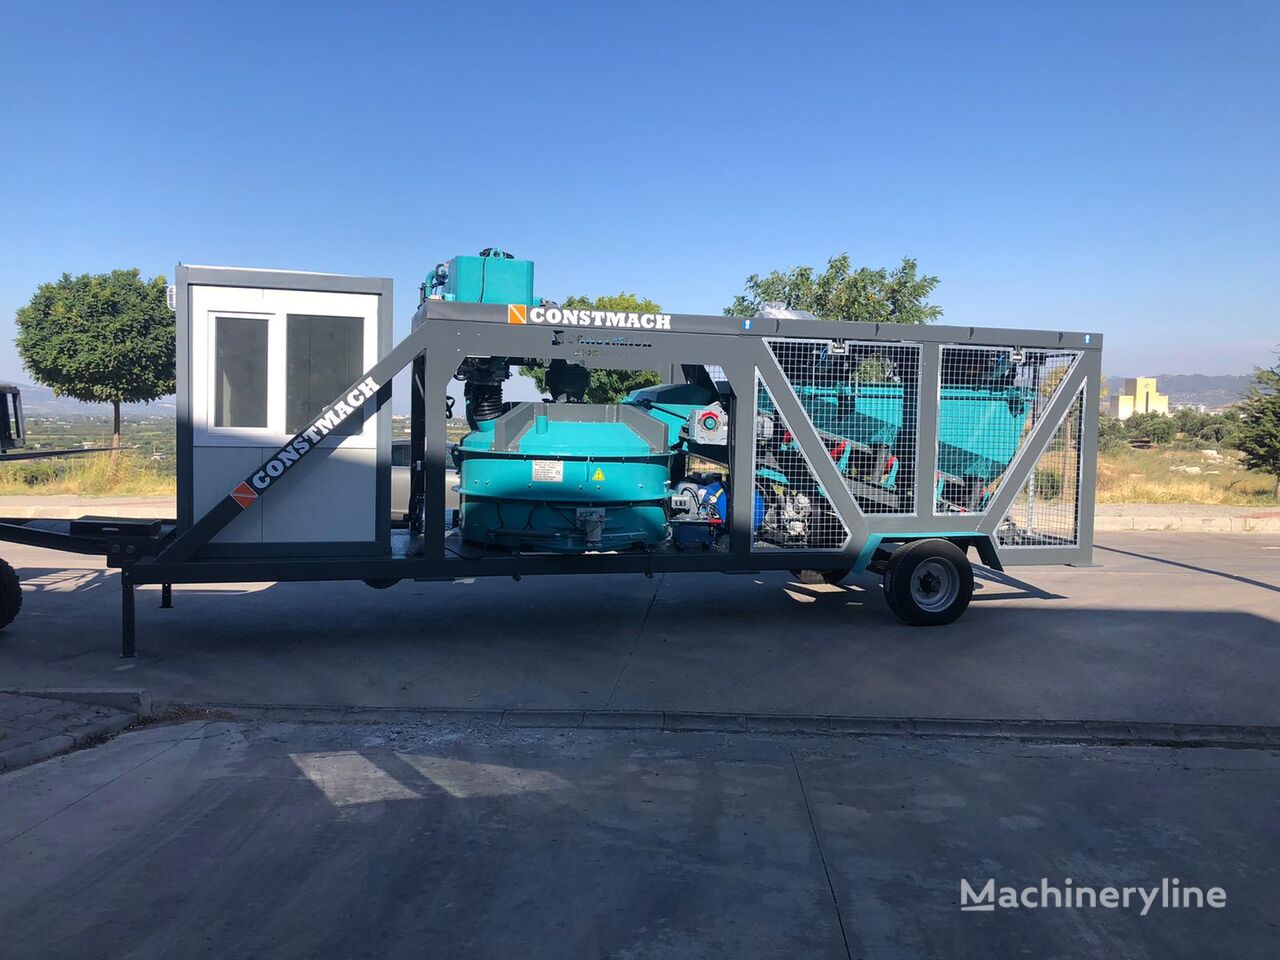 new Constmach 30 m3 Small Mobile Concrete Plant for Immediate Delivery